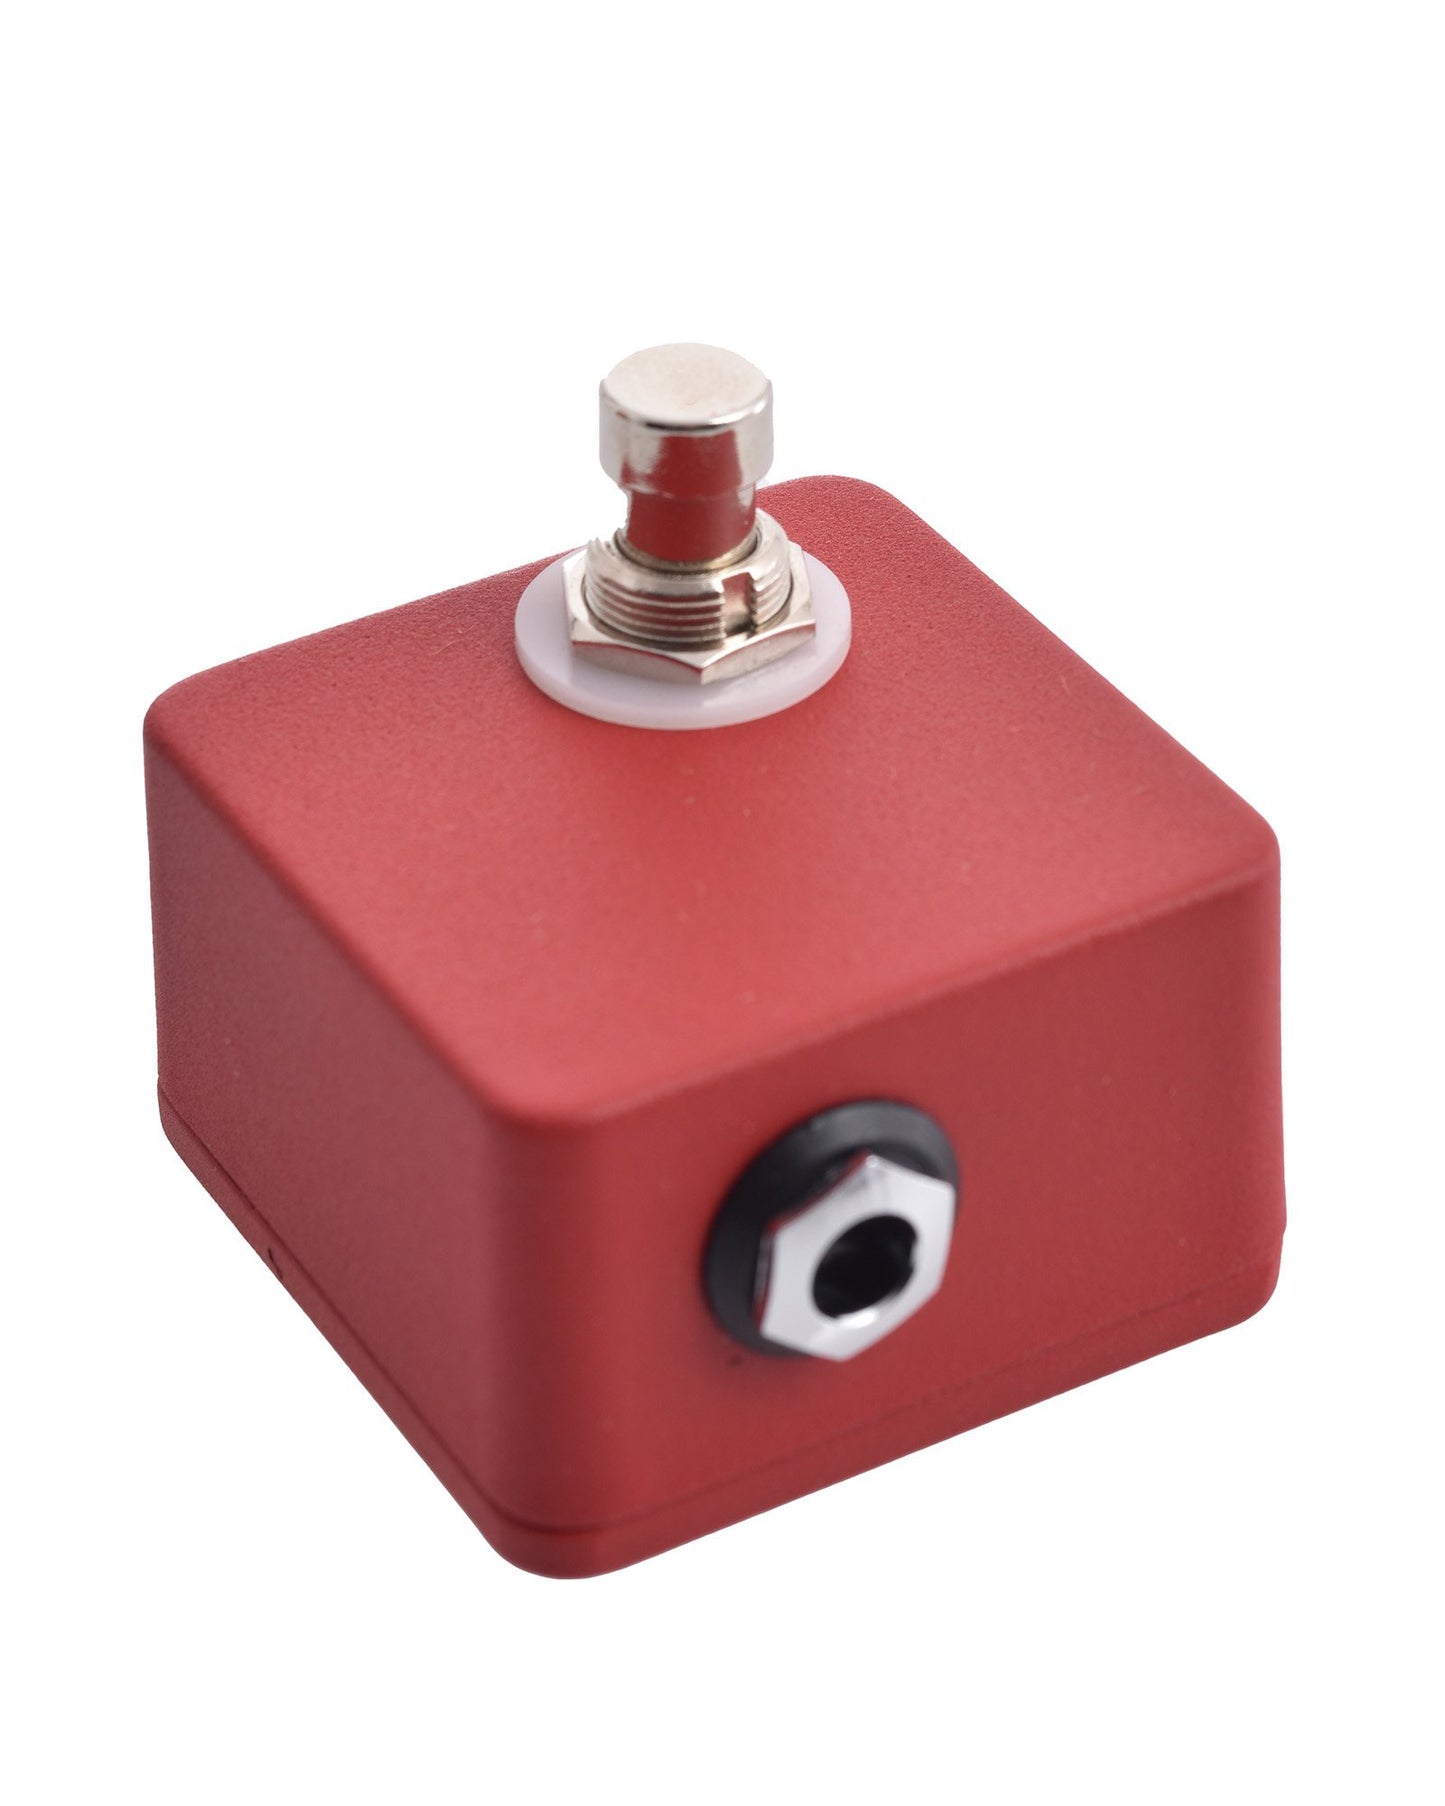 Image 1 of JHS Red Remote Switch - SKU# REDREMOTE : Product Type Effects & Signal Processors : Elderly Instruments